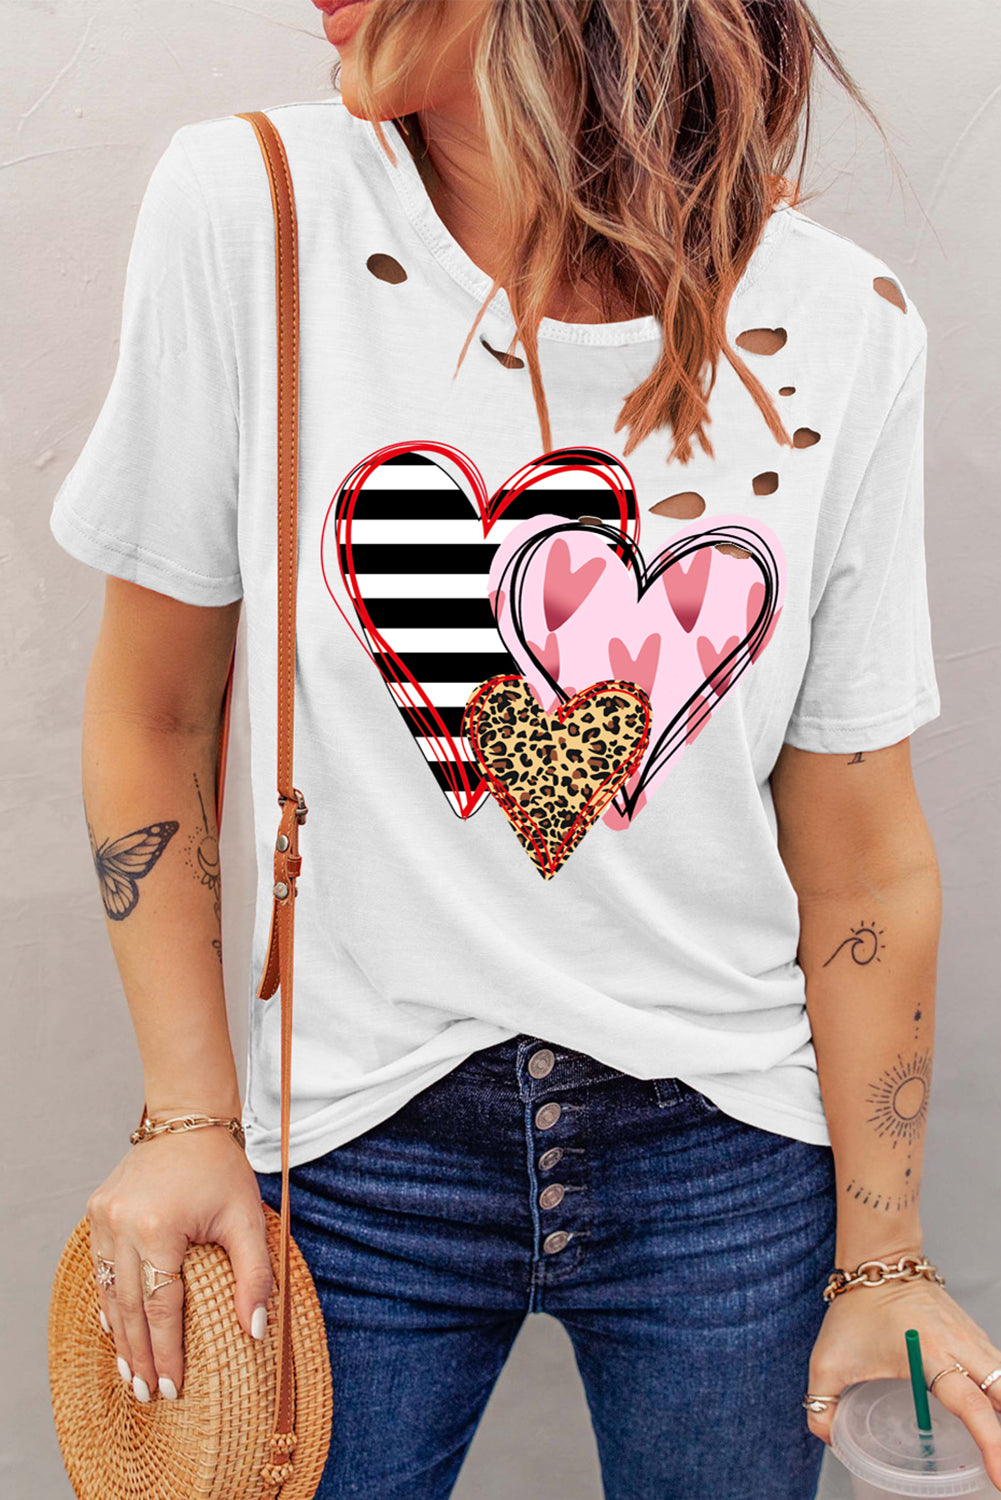 White Casual Ripped Short Sleeve T-shirt $ 23.99 - Evaless